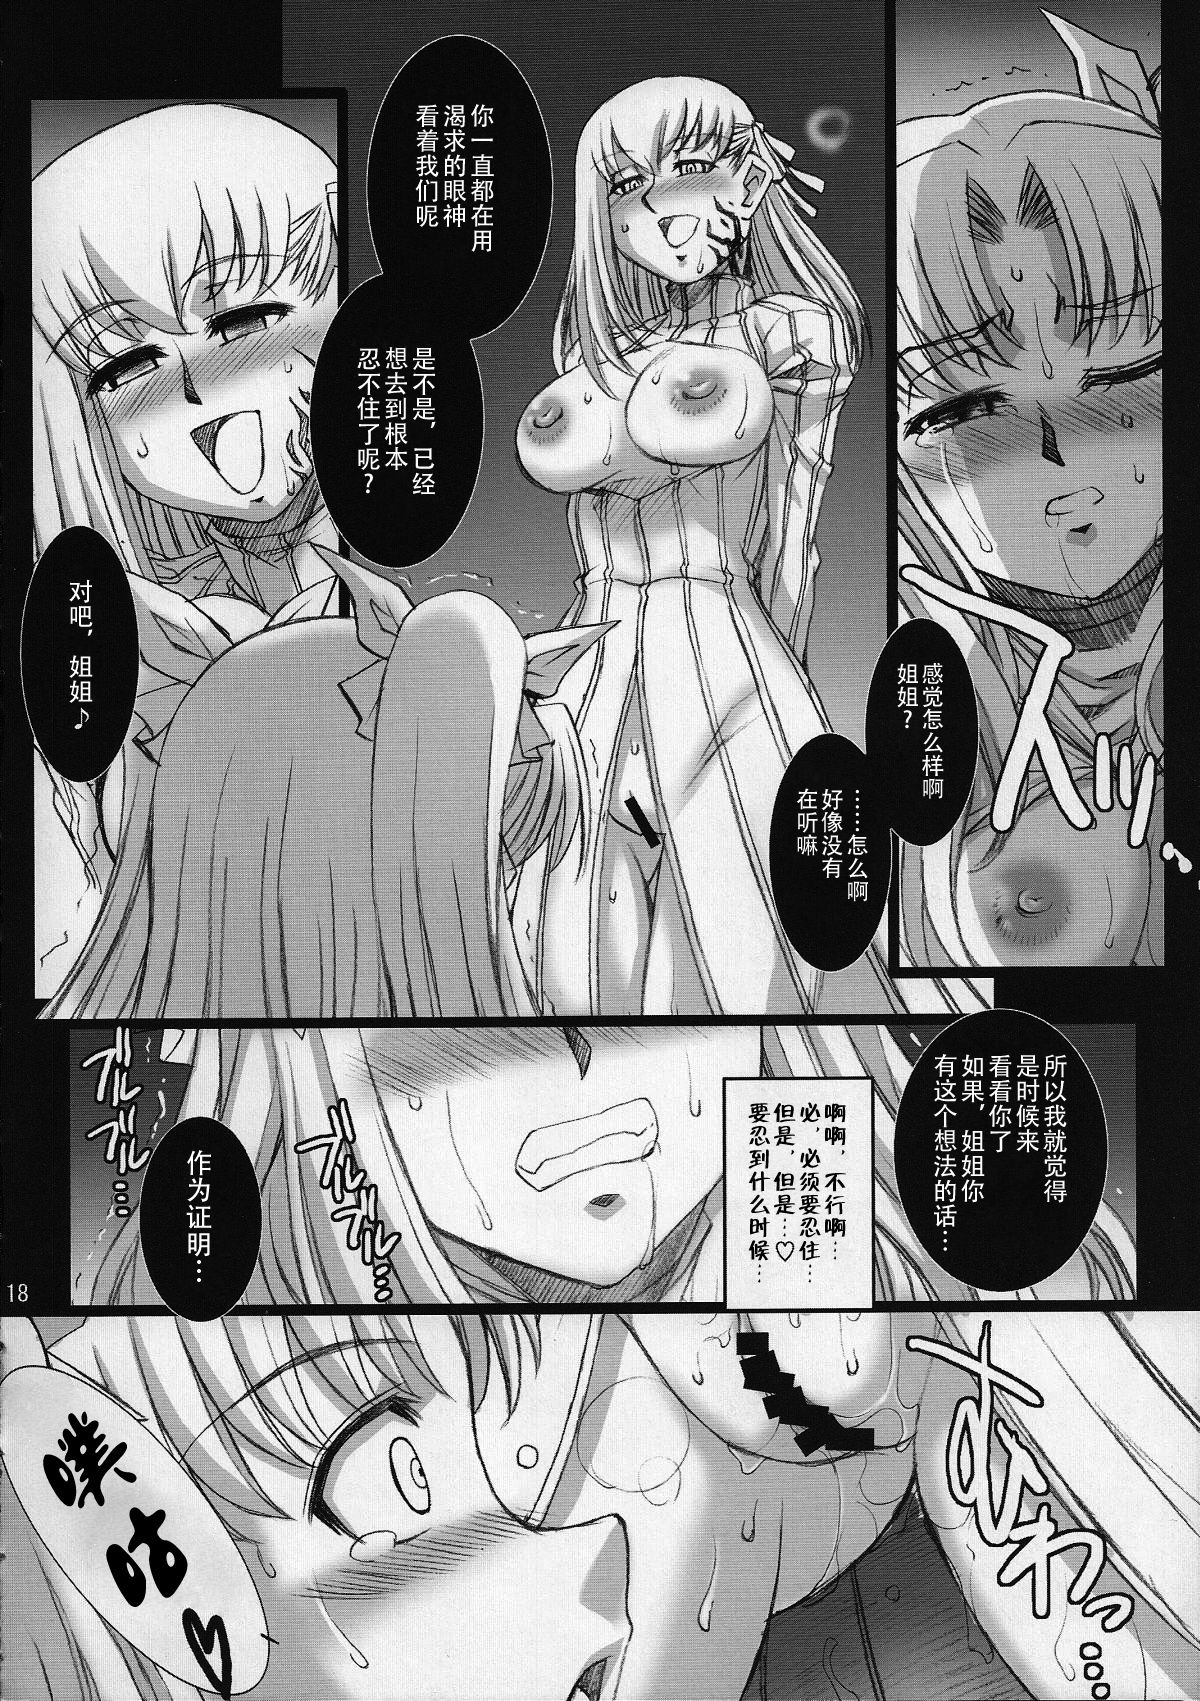 (COMIC1☆2) [H.B (B-RIVER)] Red Degeneration -DAY/3- (Fate/stay night) [Chinese] [不咕鸟汉化组] page 17 full